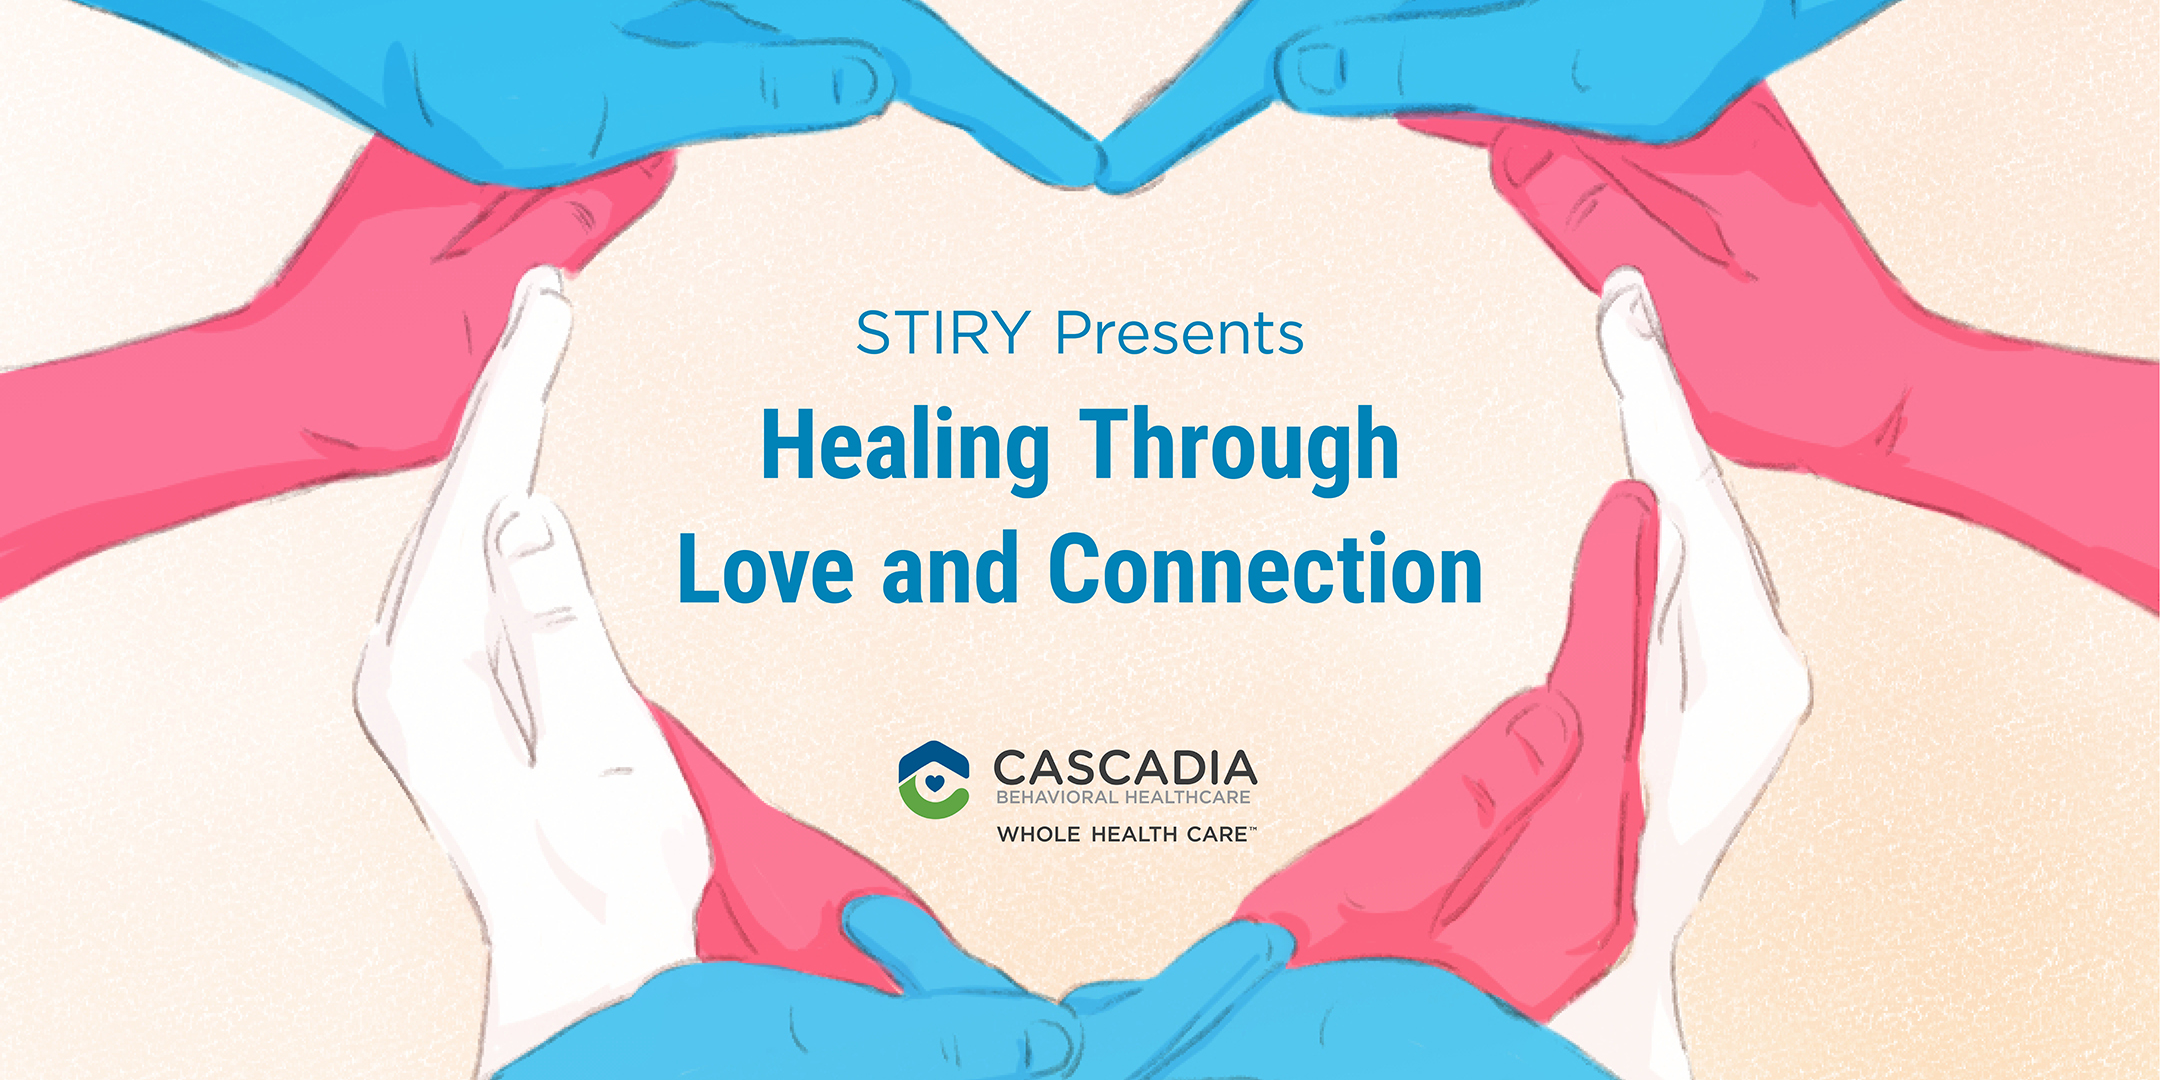 STIRY Presents: Healing Through Love and Connection